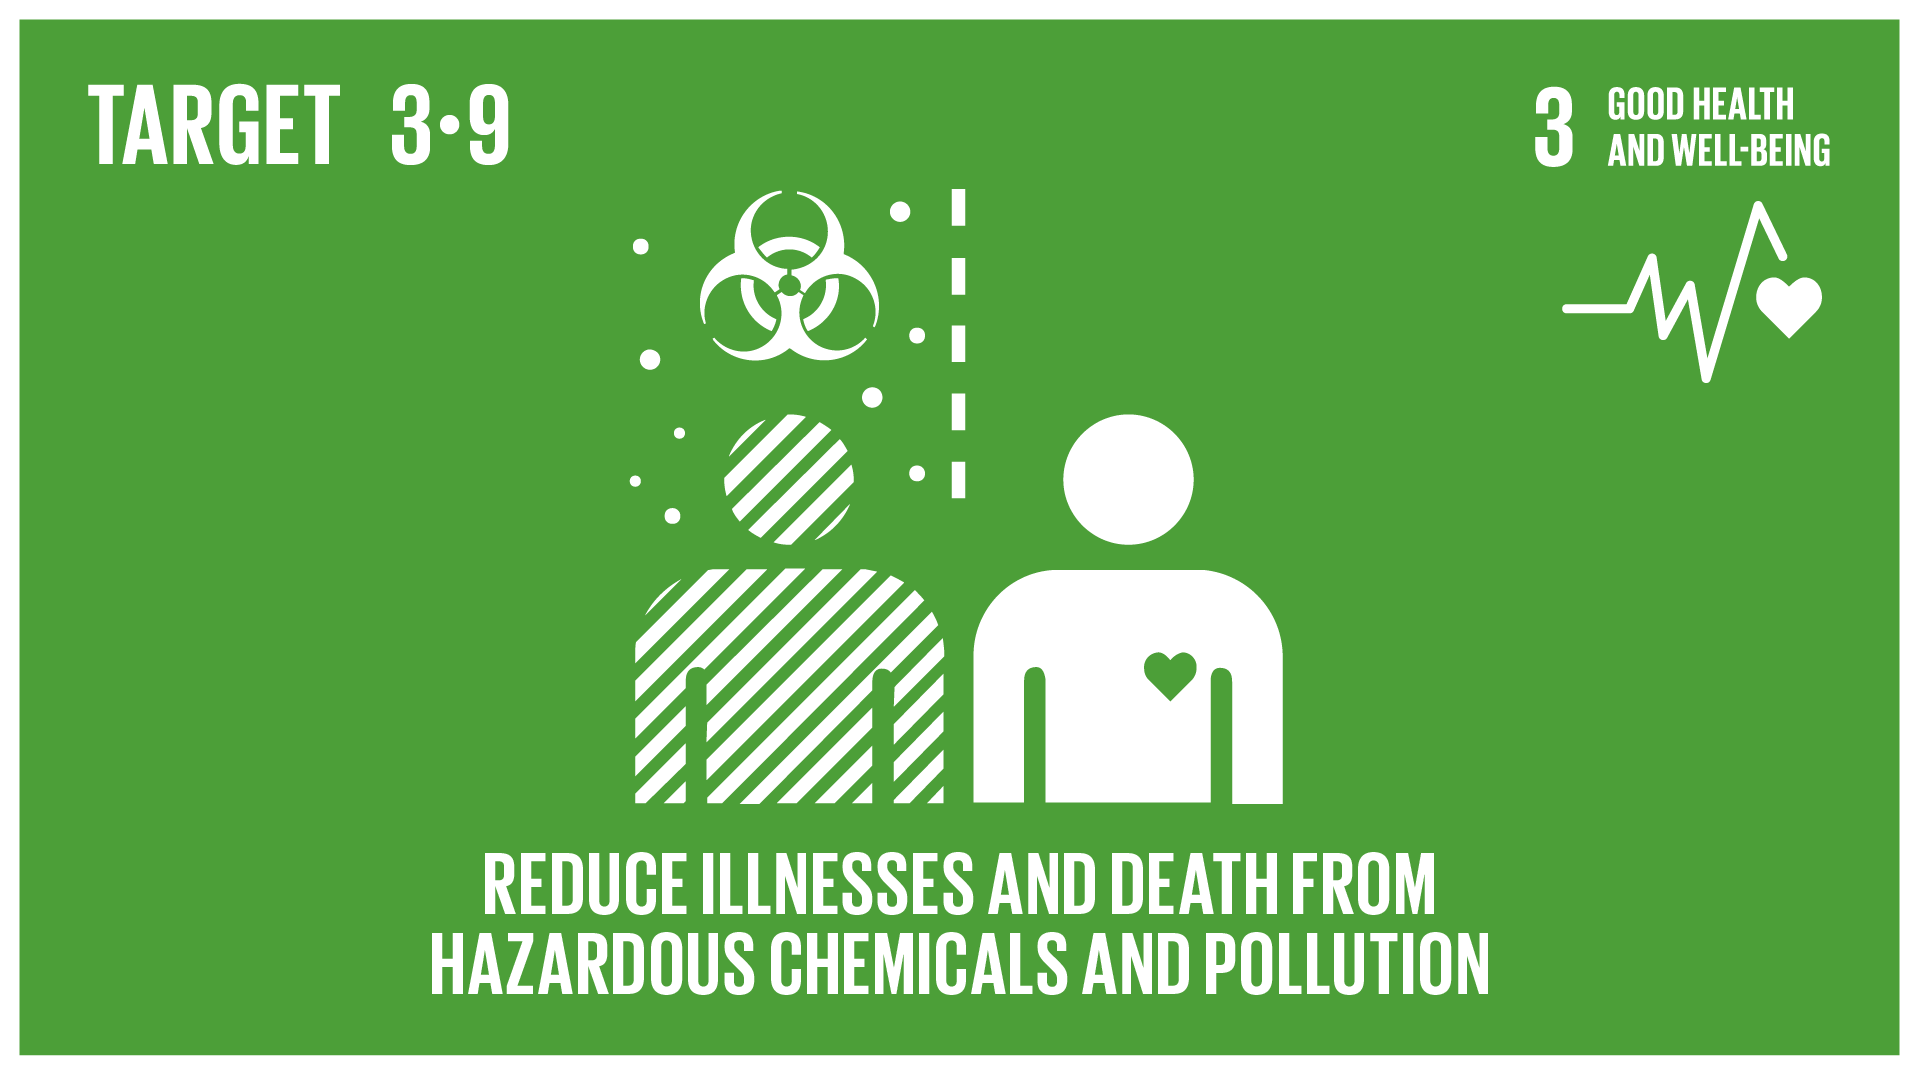 Graphic displaying the reduction in number of deaths and illnesses from hazardous chemicals and pollution